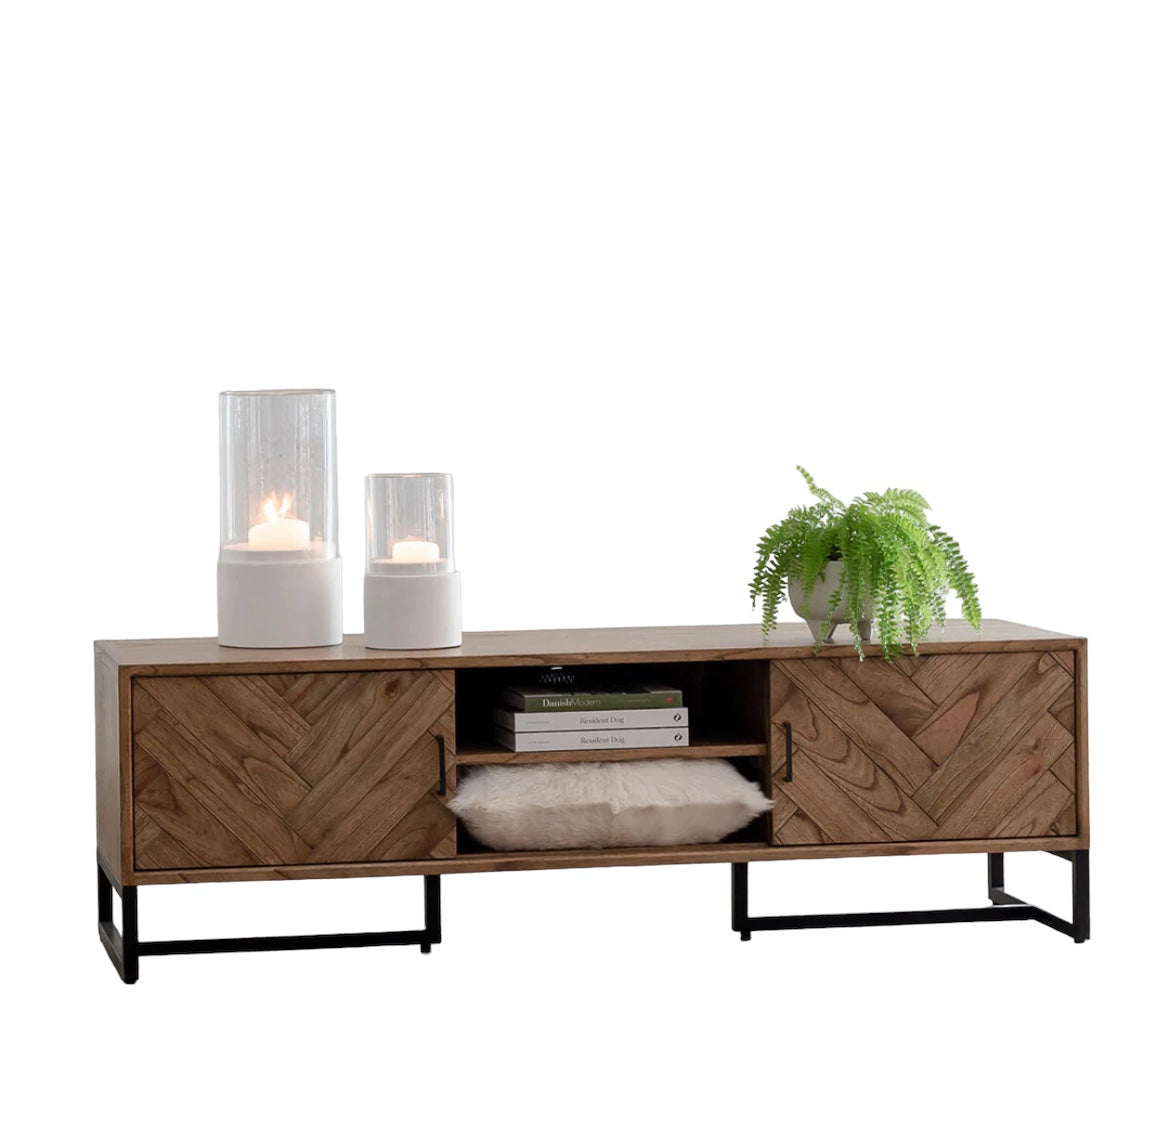 HAND MADE AXEL SCANDINAVIAN INSPIRED SOLID WOOD ENTERTAINMENT UNIT